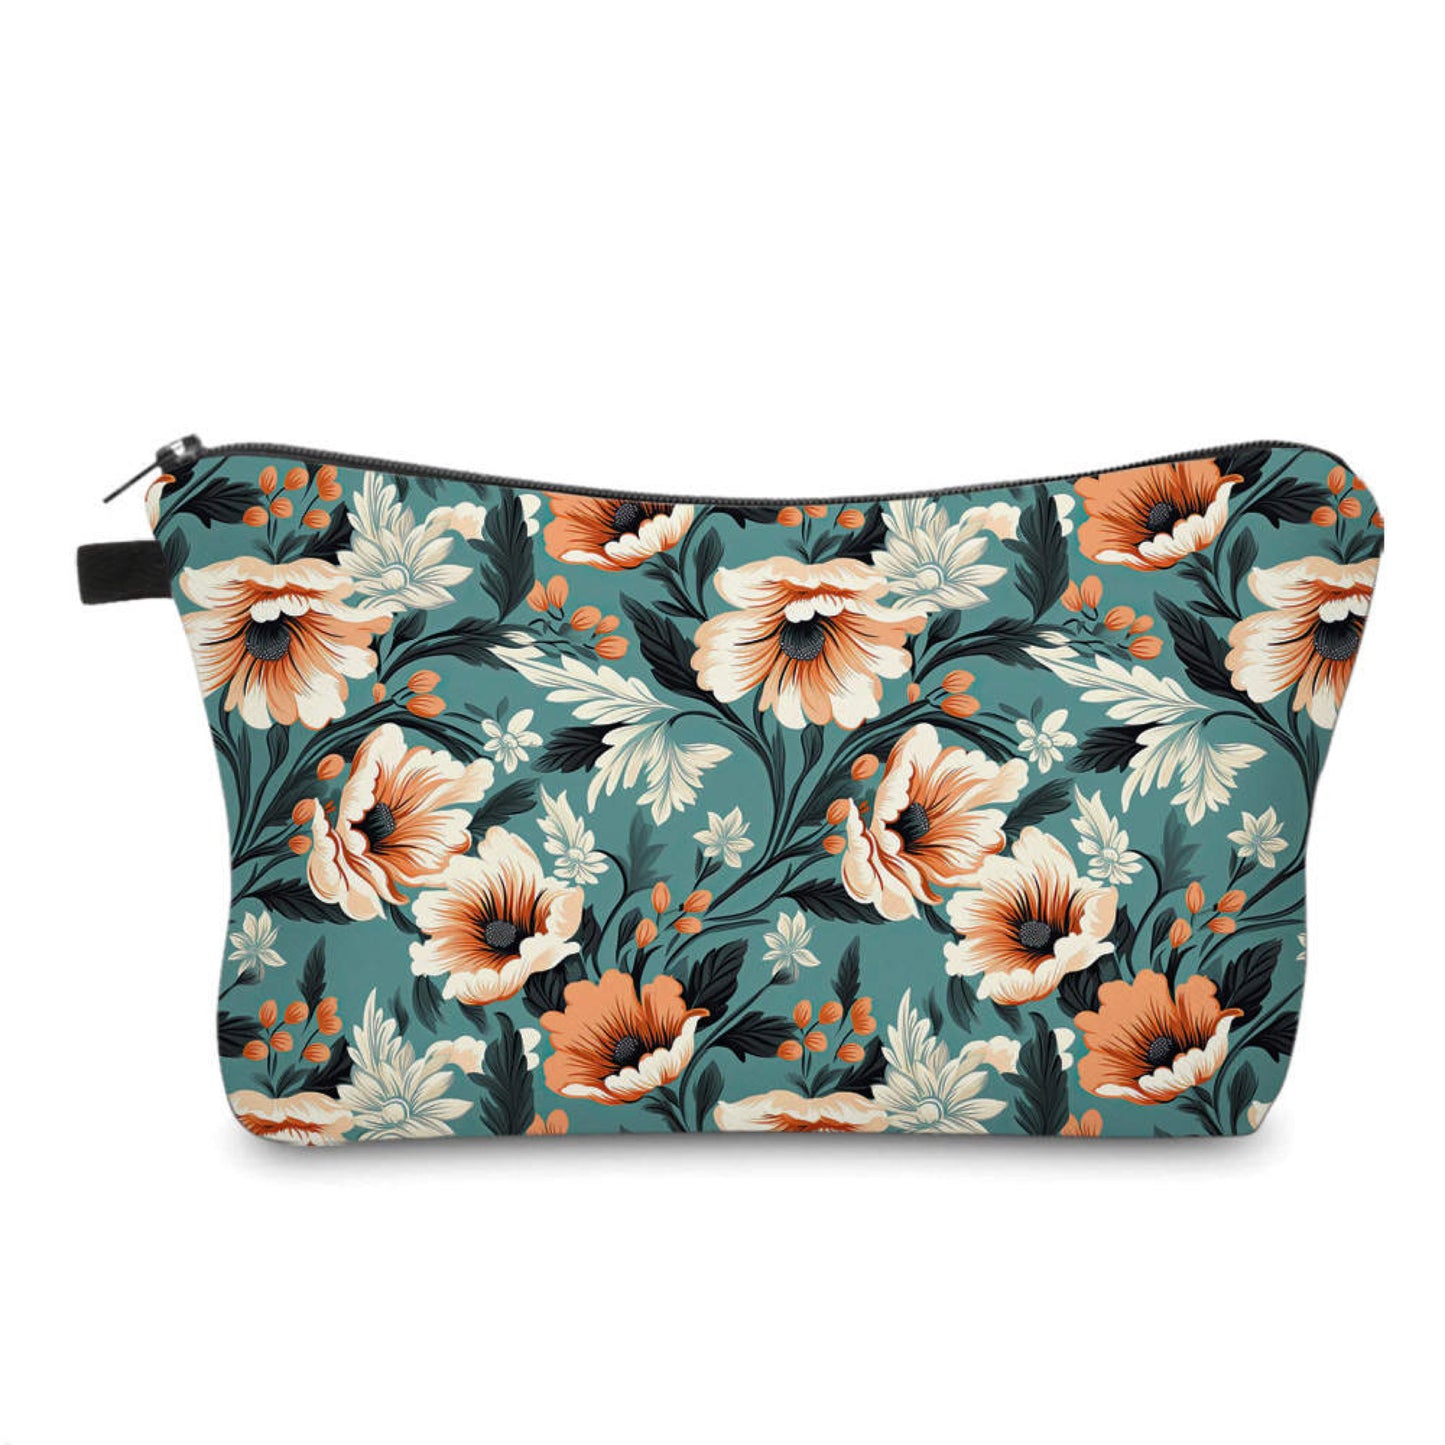 Pouch - Floral, Orange Cream On Teal - Three Bears Boutique